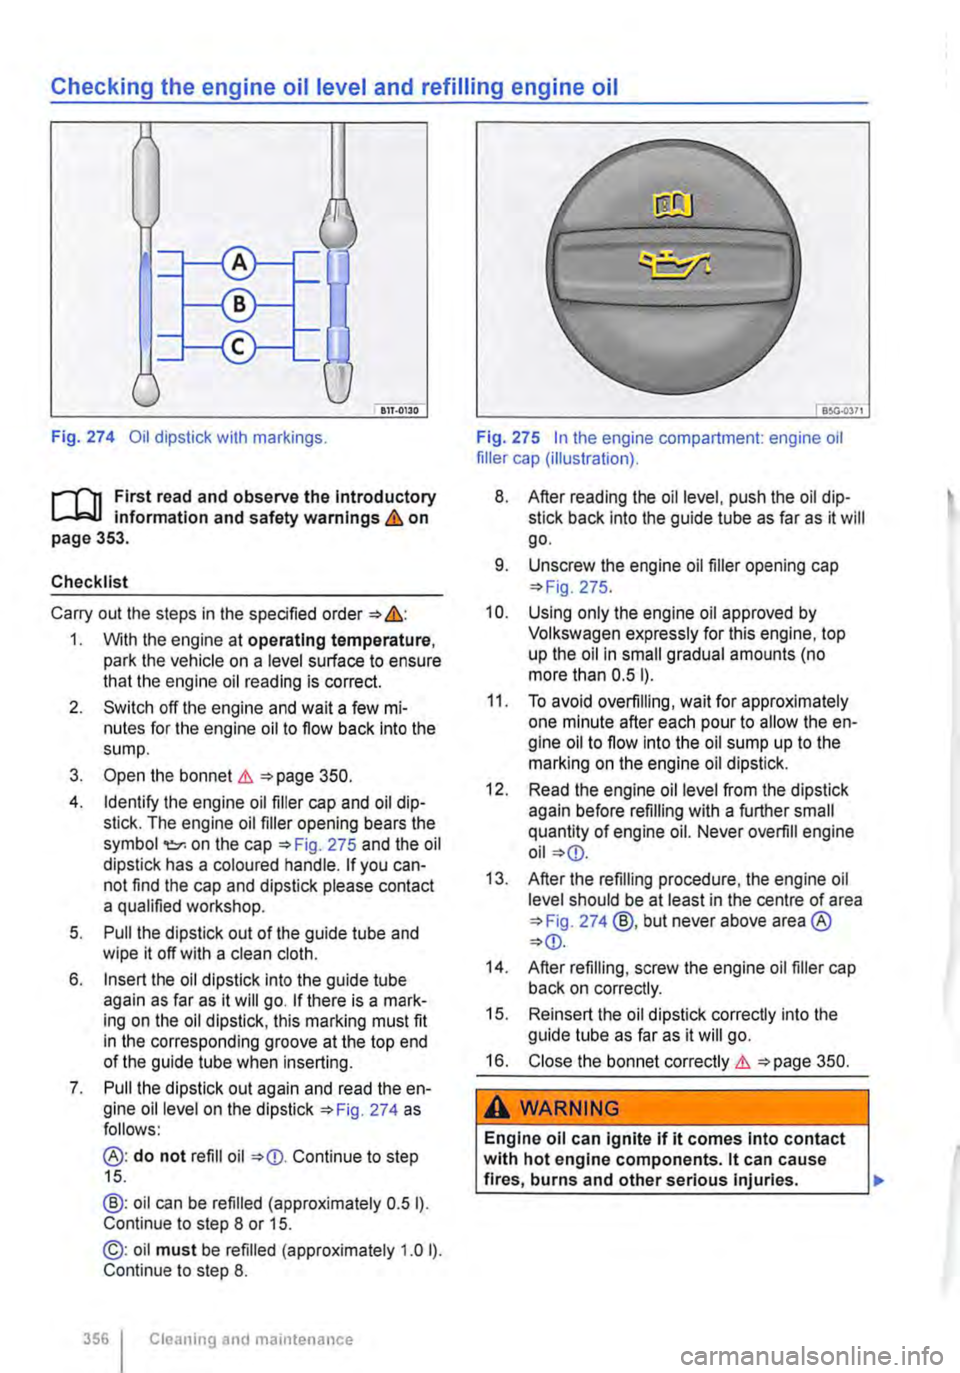 VOLKSWAGEN TRANSPORTER 2019  Owners Manual Checking the engine oil level and refilling engine oil 
Fig. 274 Oil dipstick with markings. 
r-111 First read and observe the Introductory L-W! information and safety warnings & on page 353. 
Checkli